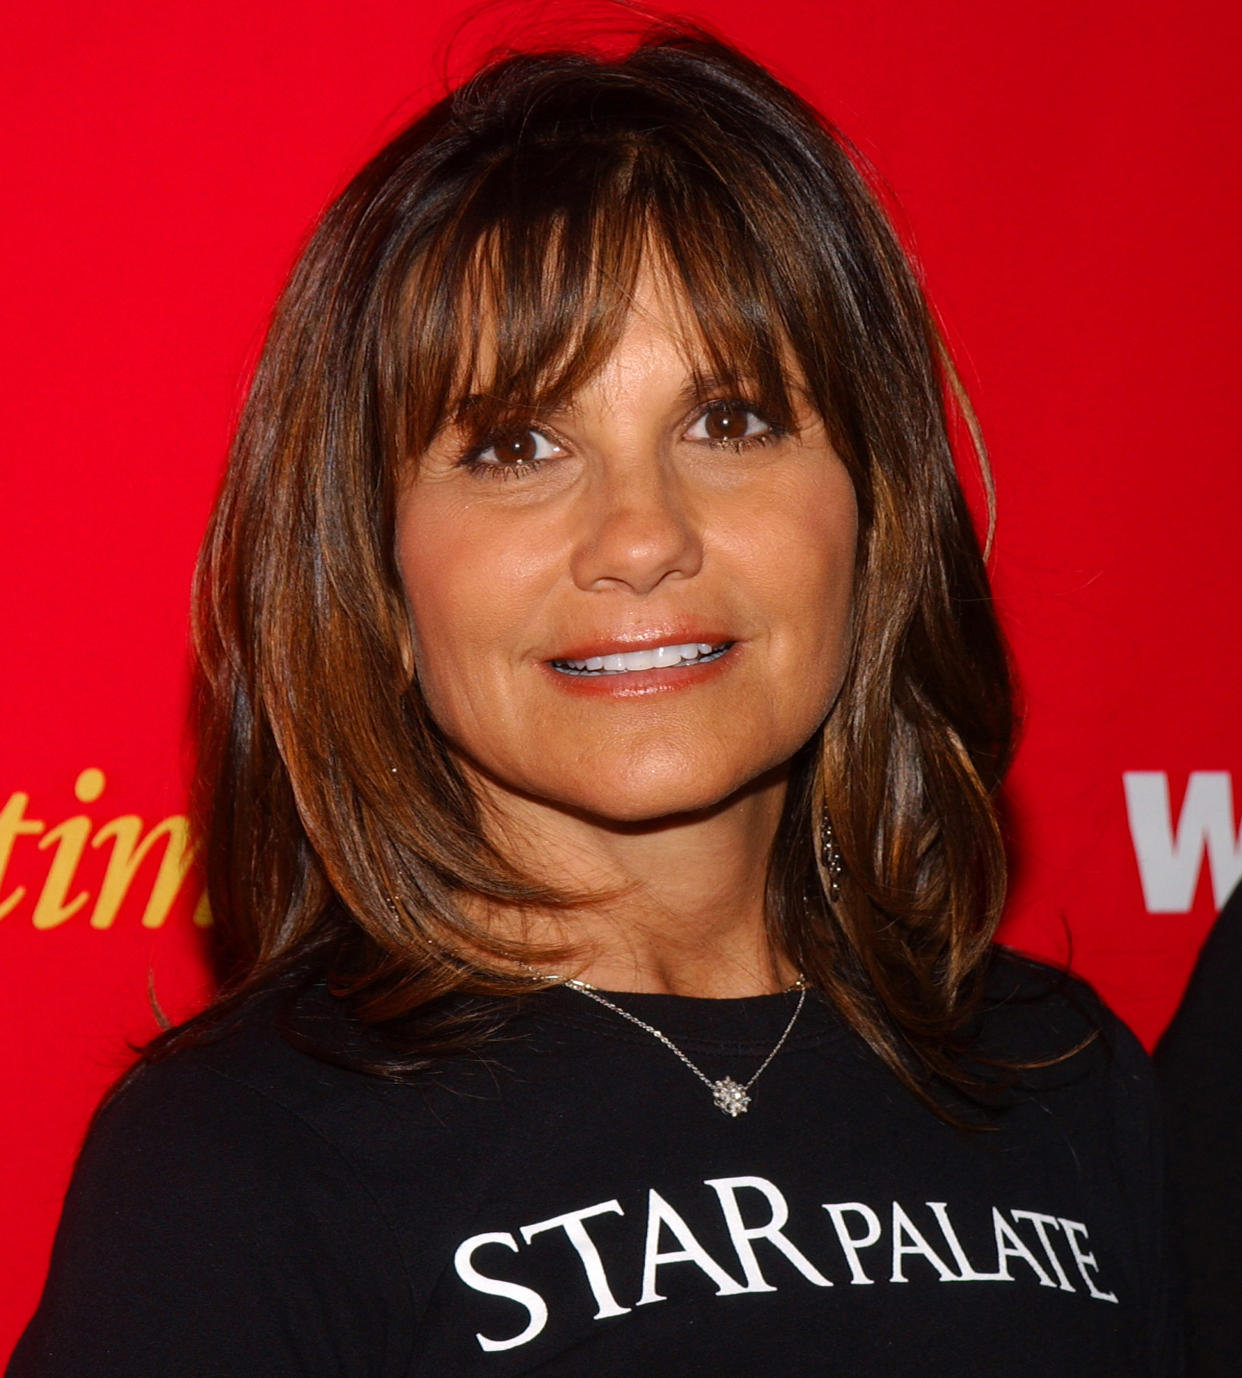 Lynne Spears, the mother of Britney Spears, appeared to send her daughter a message of congratulations following her wedding last week. (Photo: Jean-Paul Aussenard/WireImage)